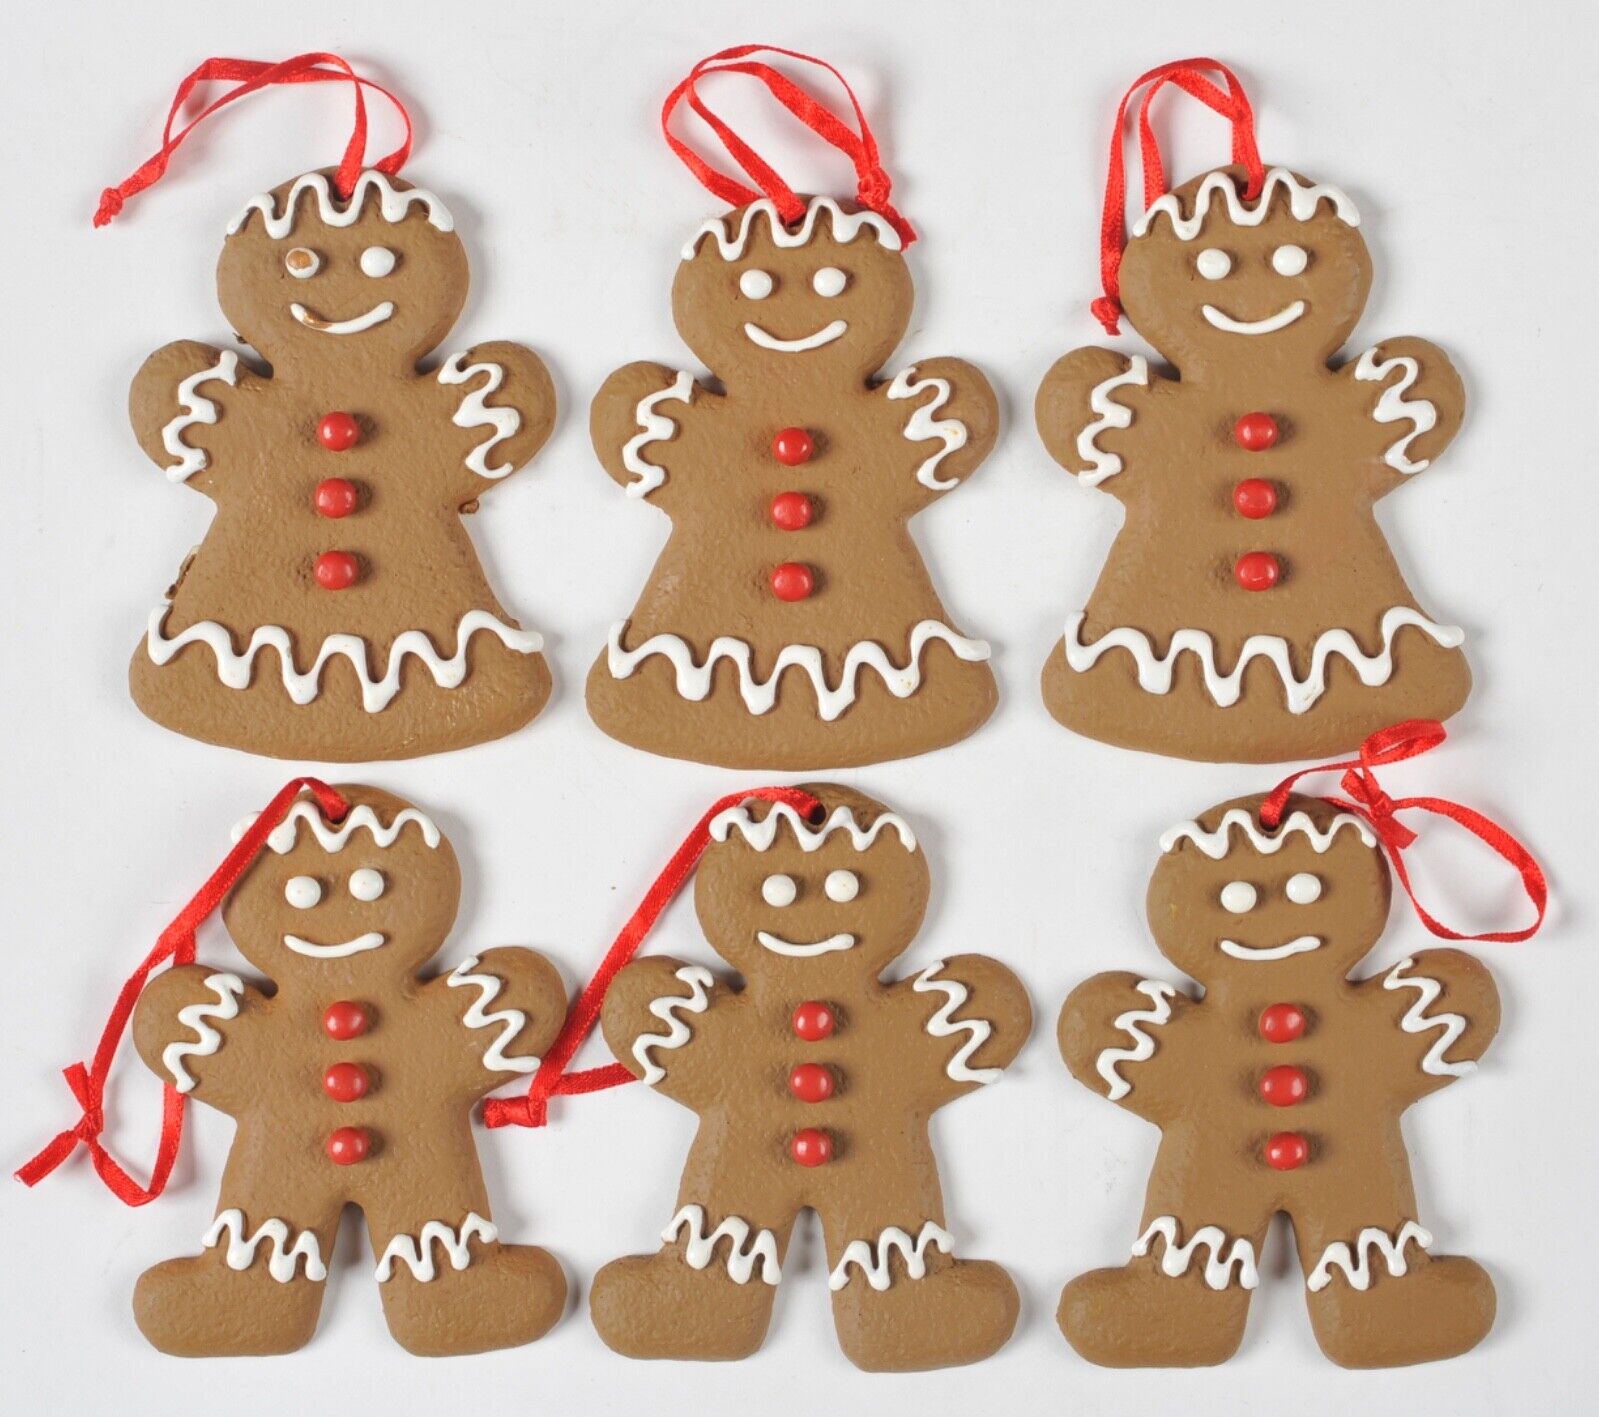 House of Lloyd Christmas Around The World Gingerbread People Ornament Set of 6